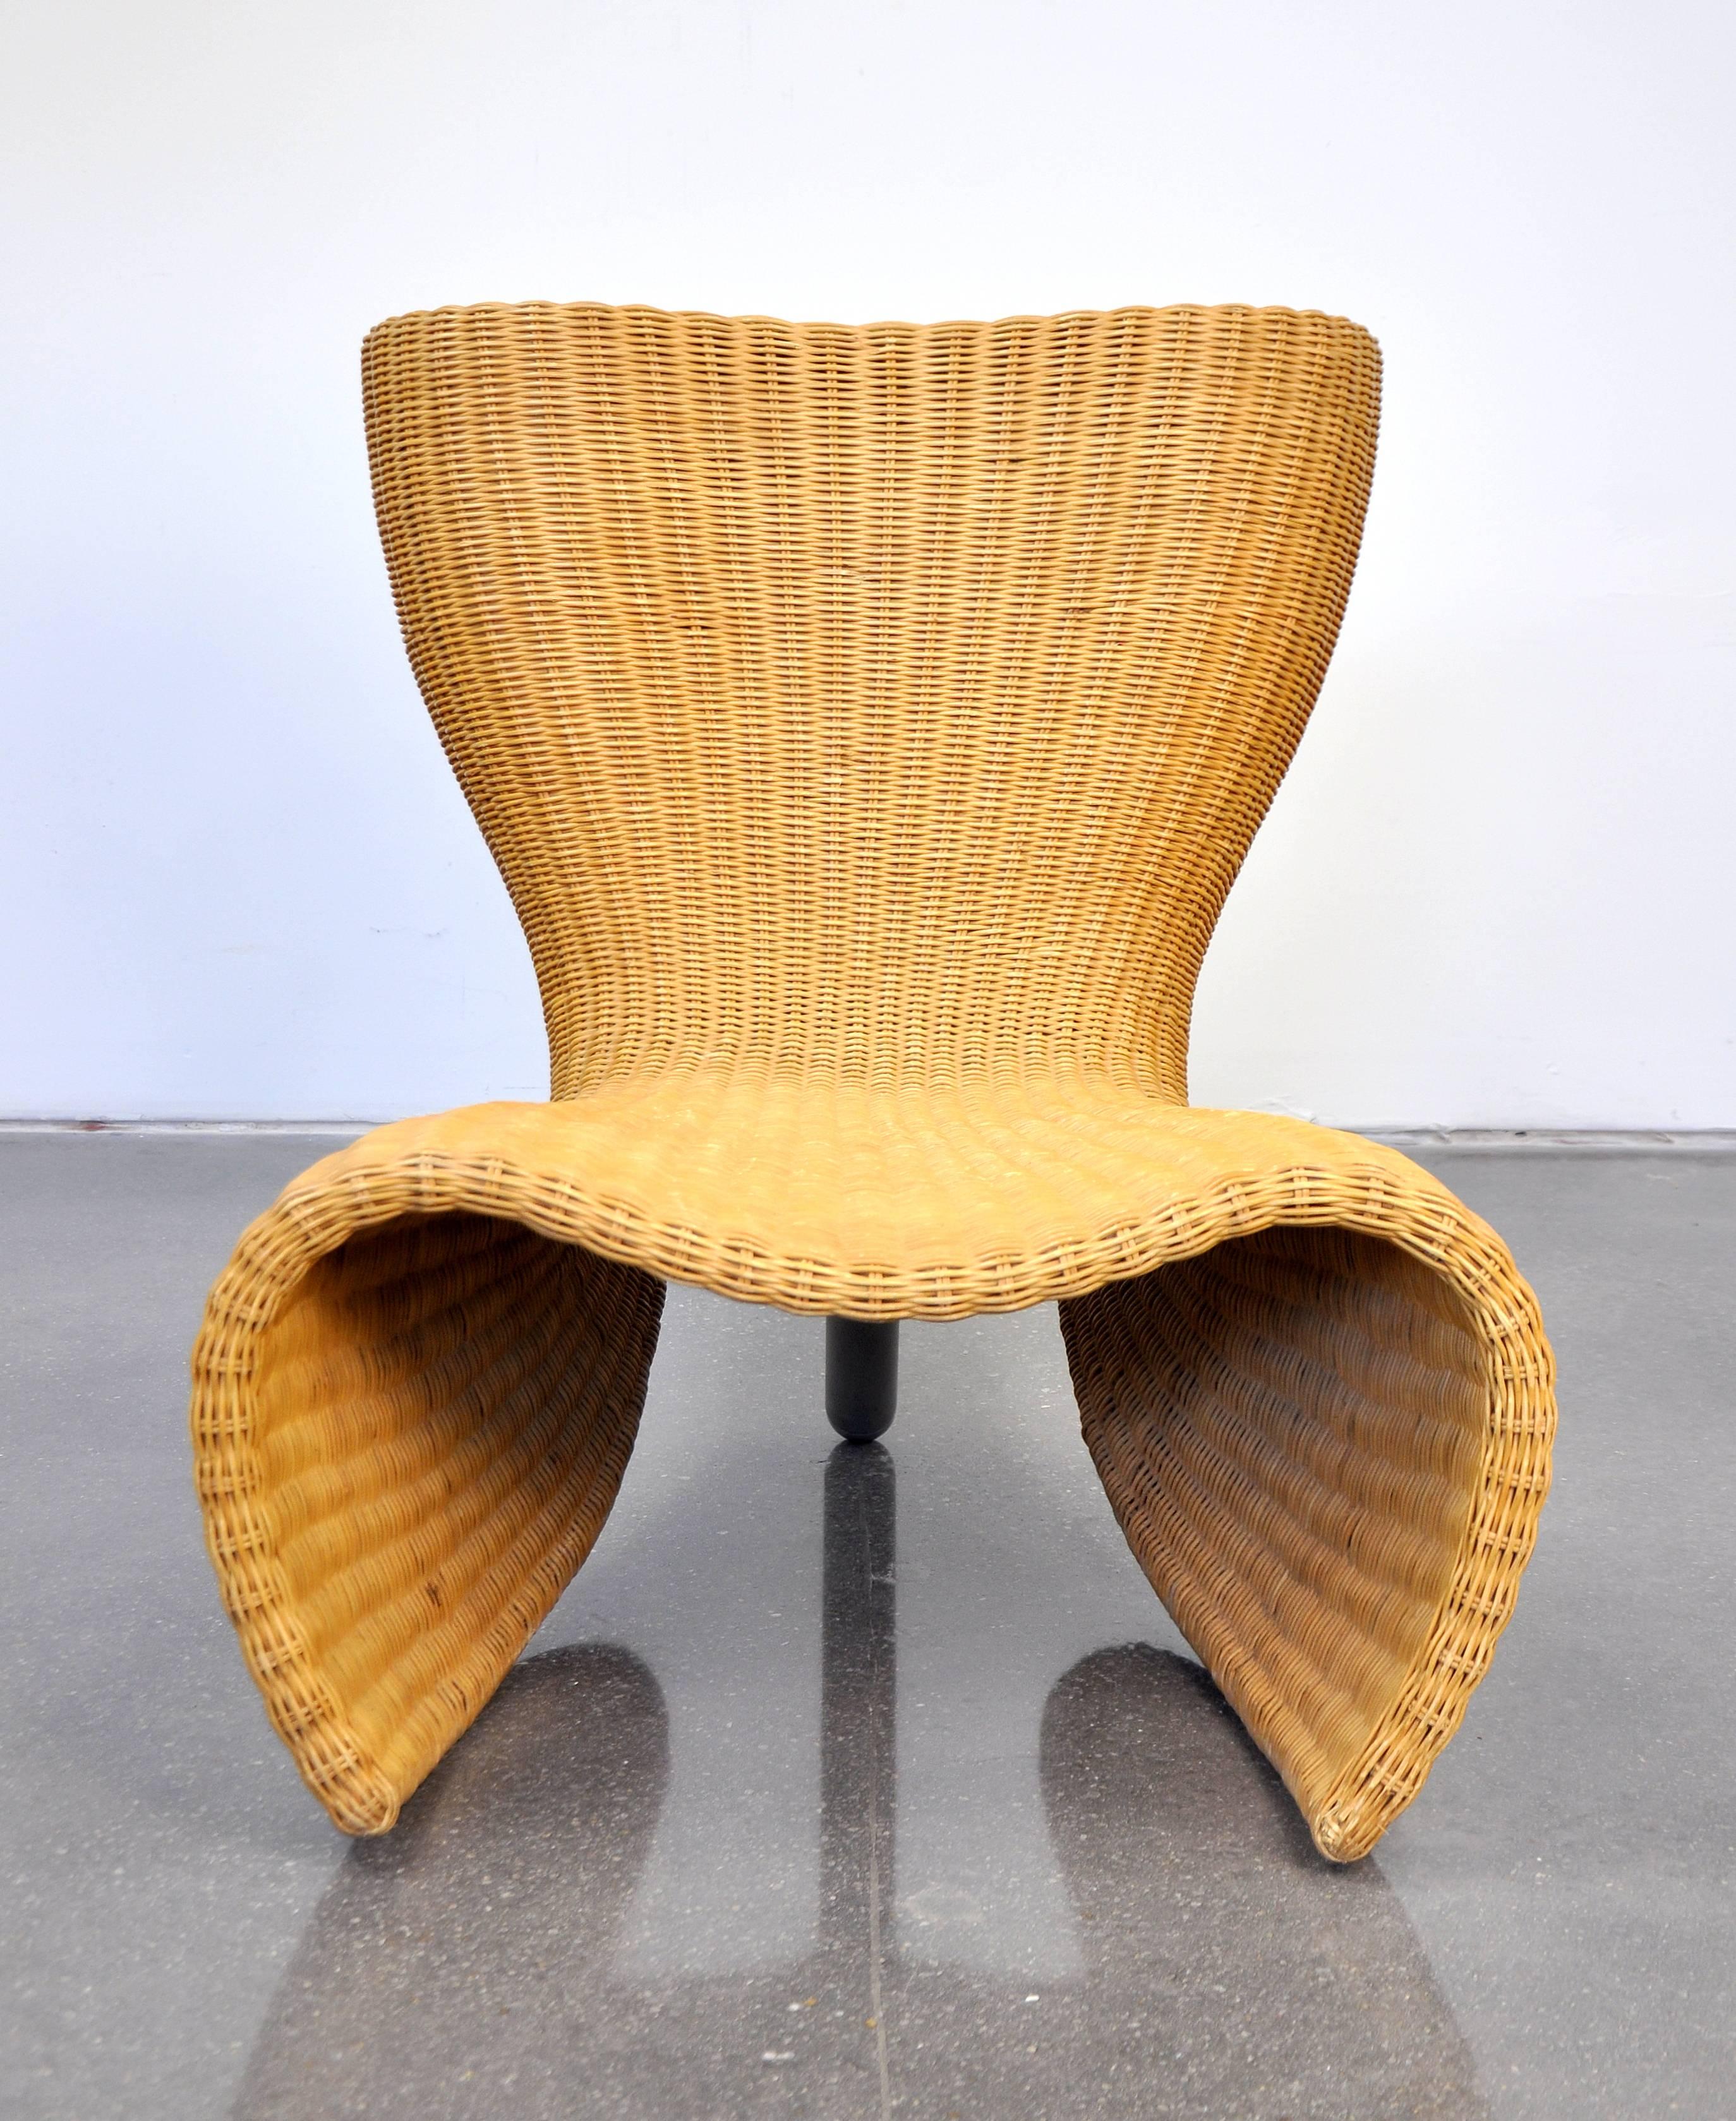 A rare one owner example of the tubular steel, cane, woven rattan and aluminum lounge chair designed by Marc Newson for Idee in 1990. Biomorphic curves and organic, sculptural design meet to create something truly unique.
As stated on the